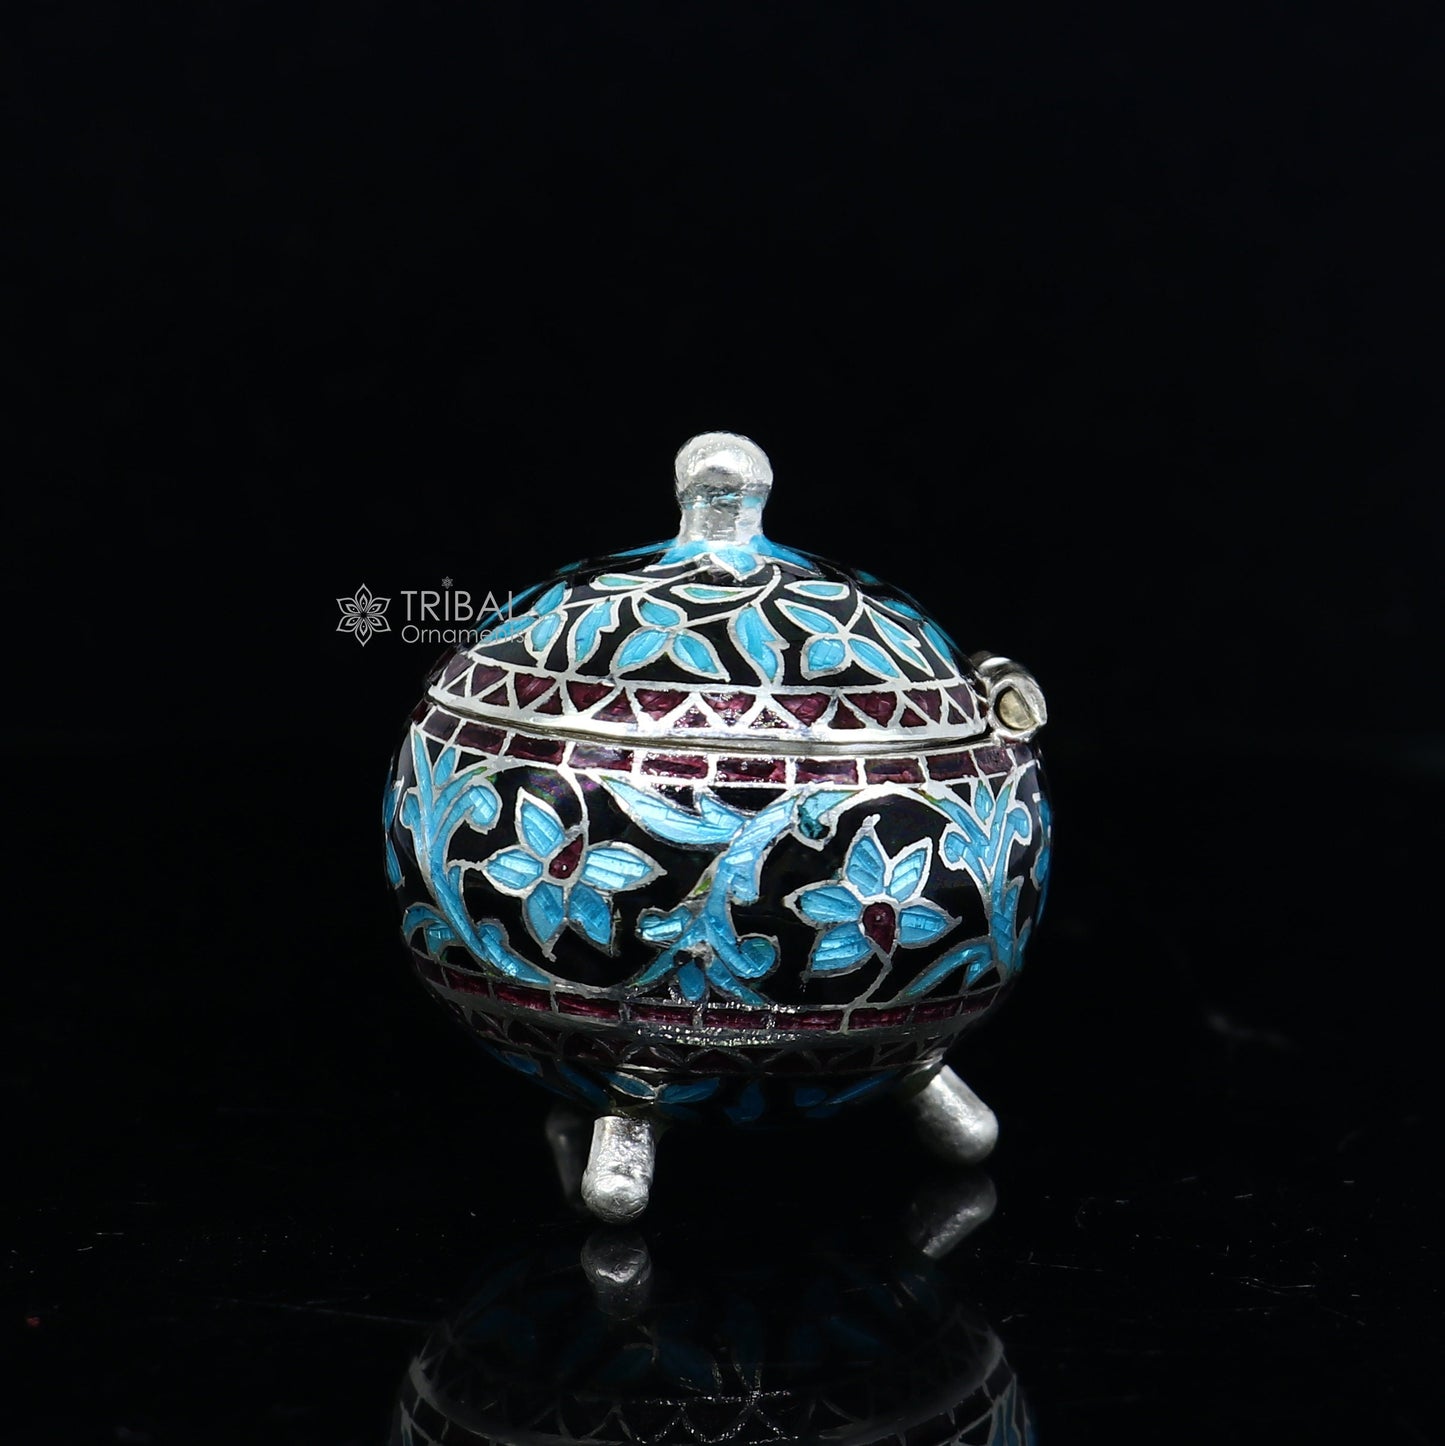 925 Sterling silver handmade fabulous trinket box, Silver container box, casket box, sindoor box, enamel work customized gifting box stb834 - TRIBAL ORNAMENTS